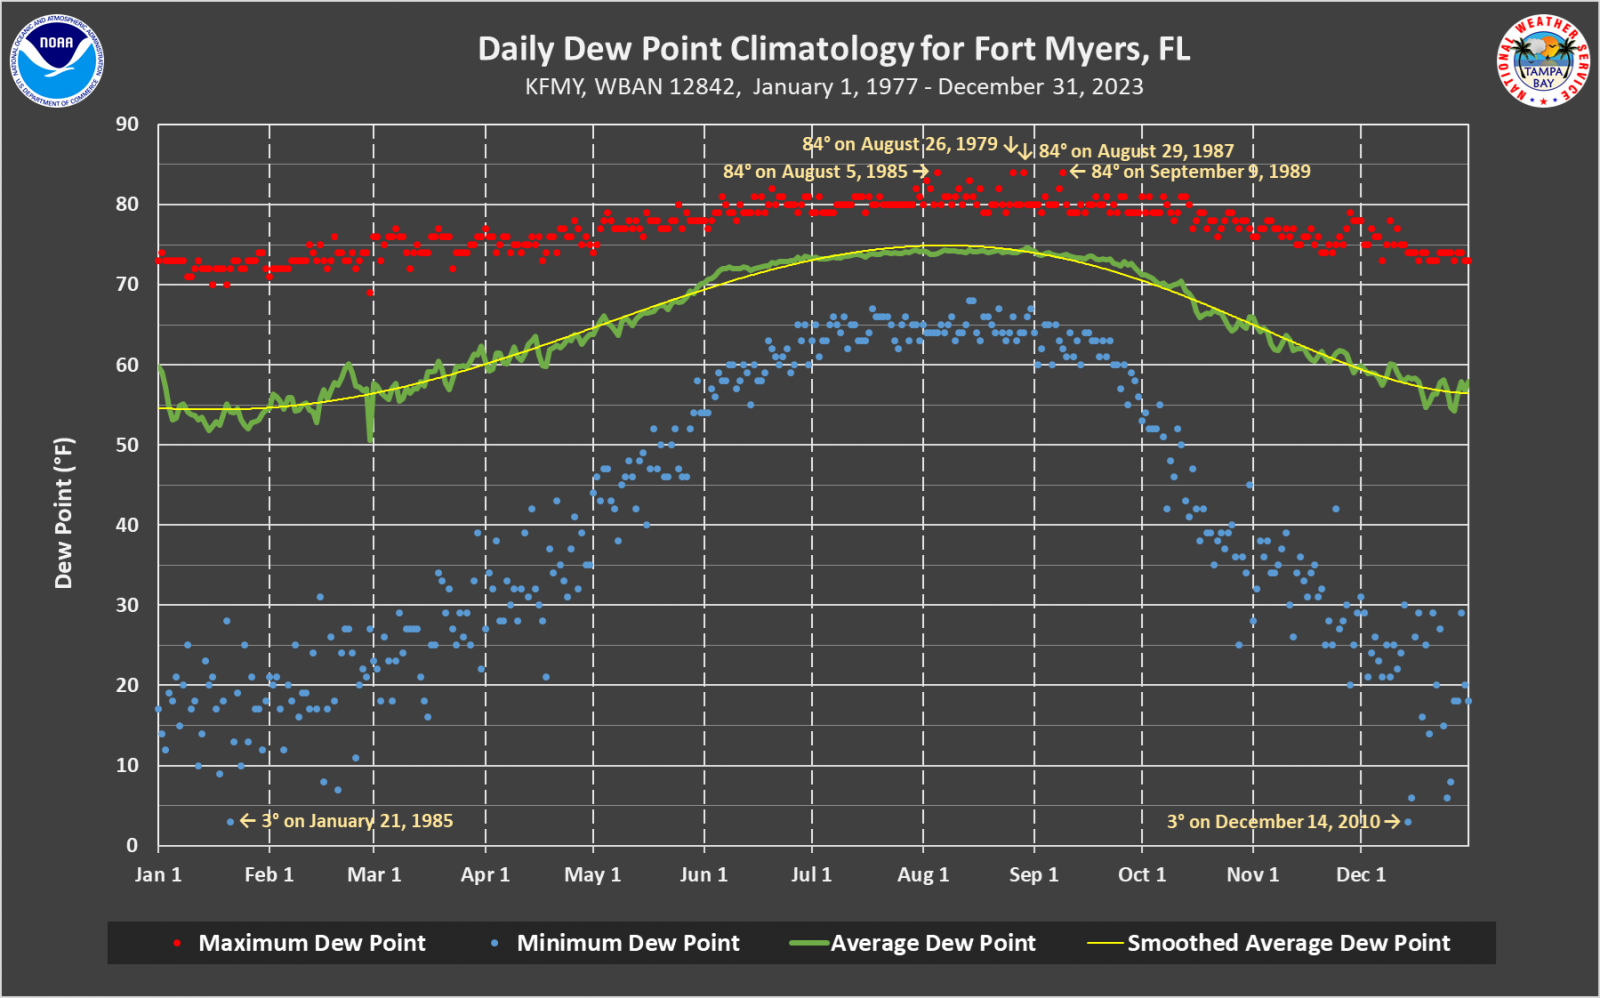 Daily Dew Point Climatology graph for Fort Myers, FL